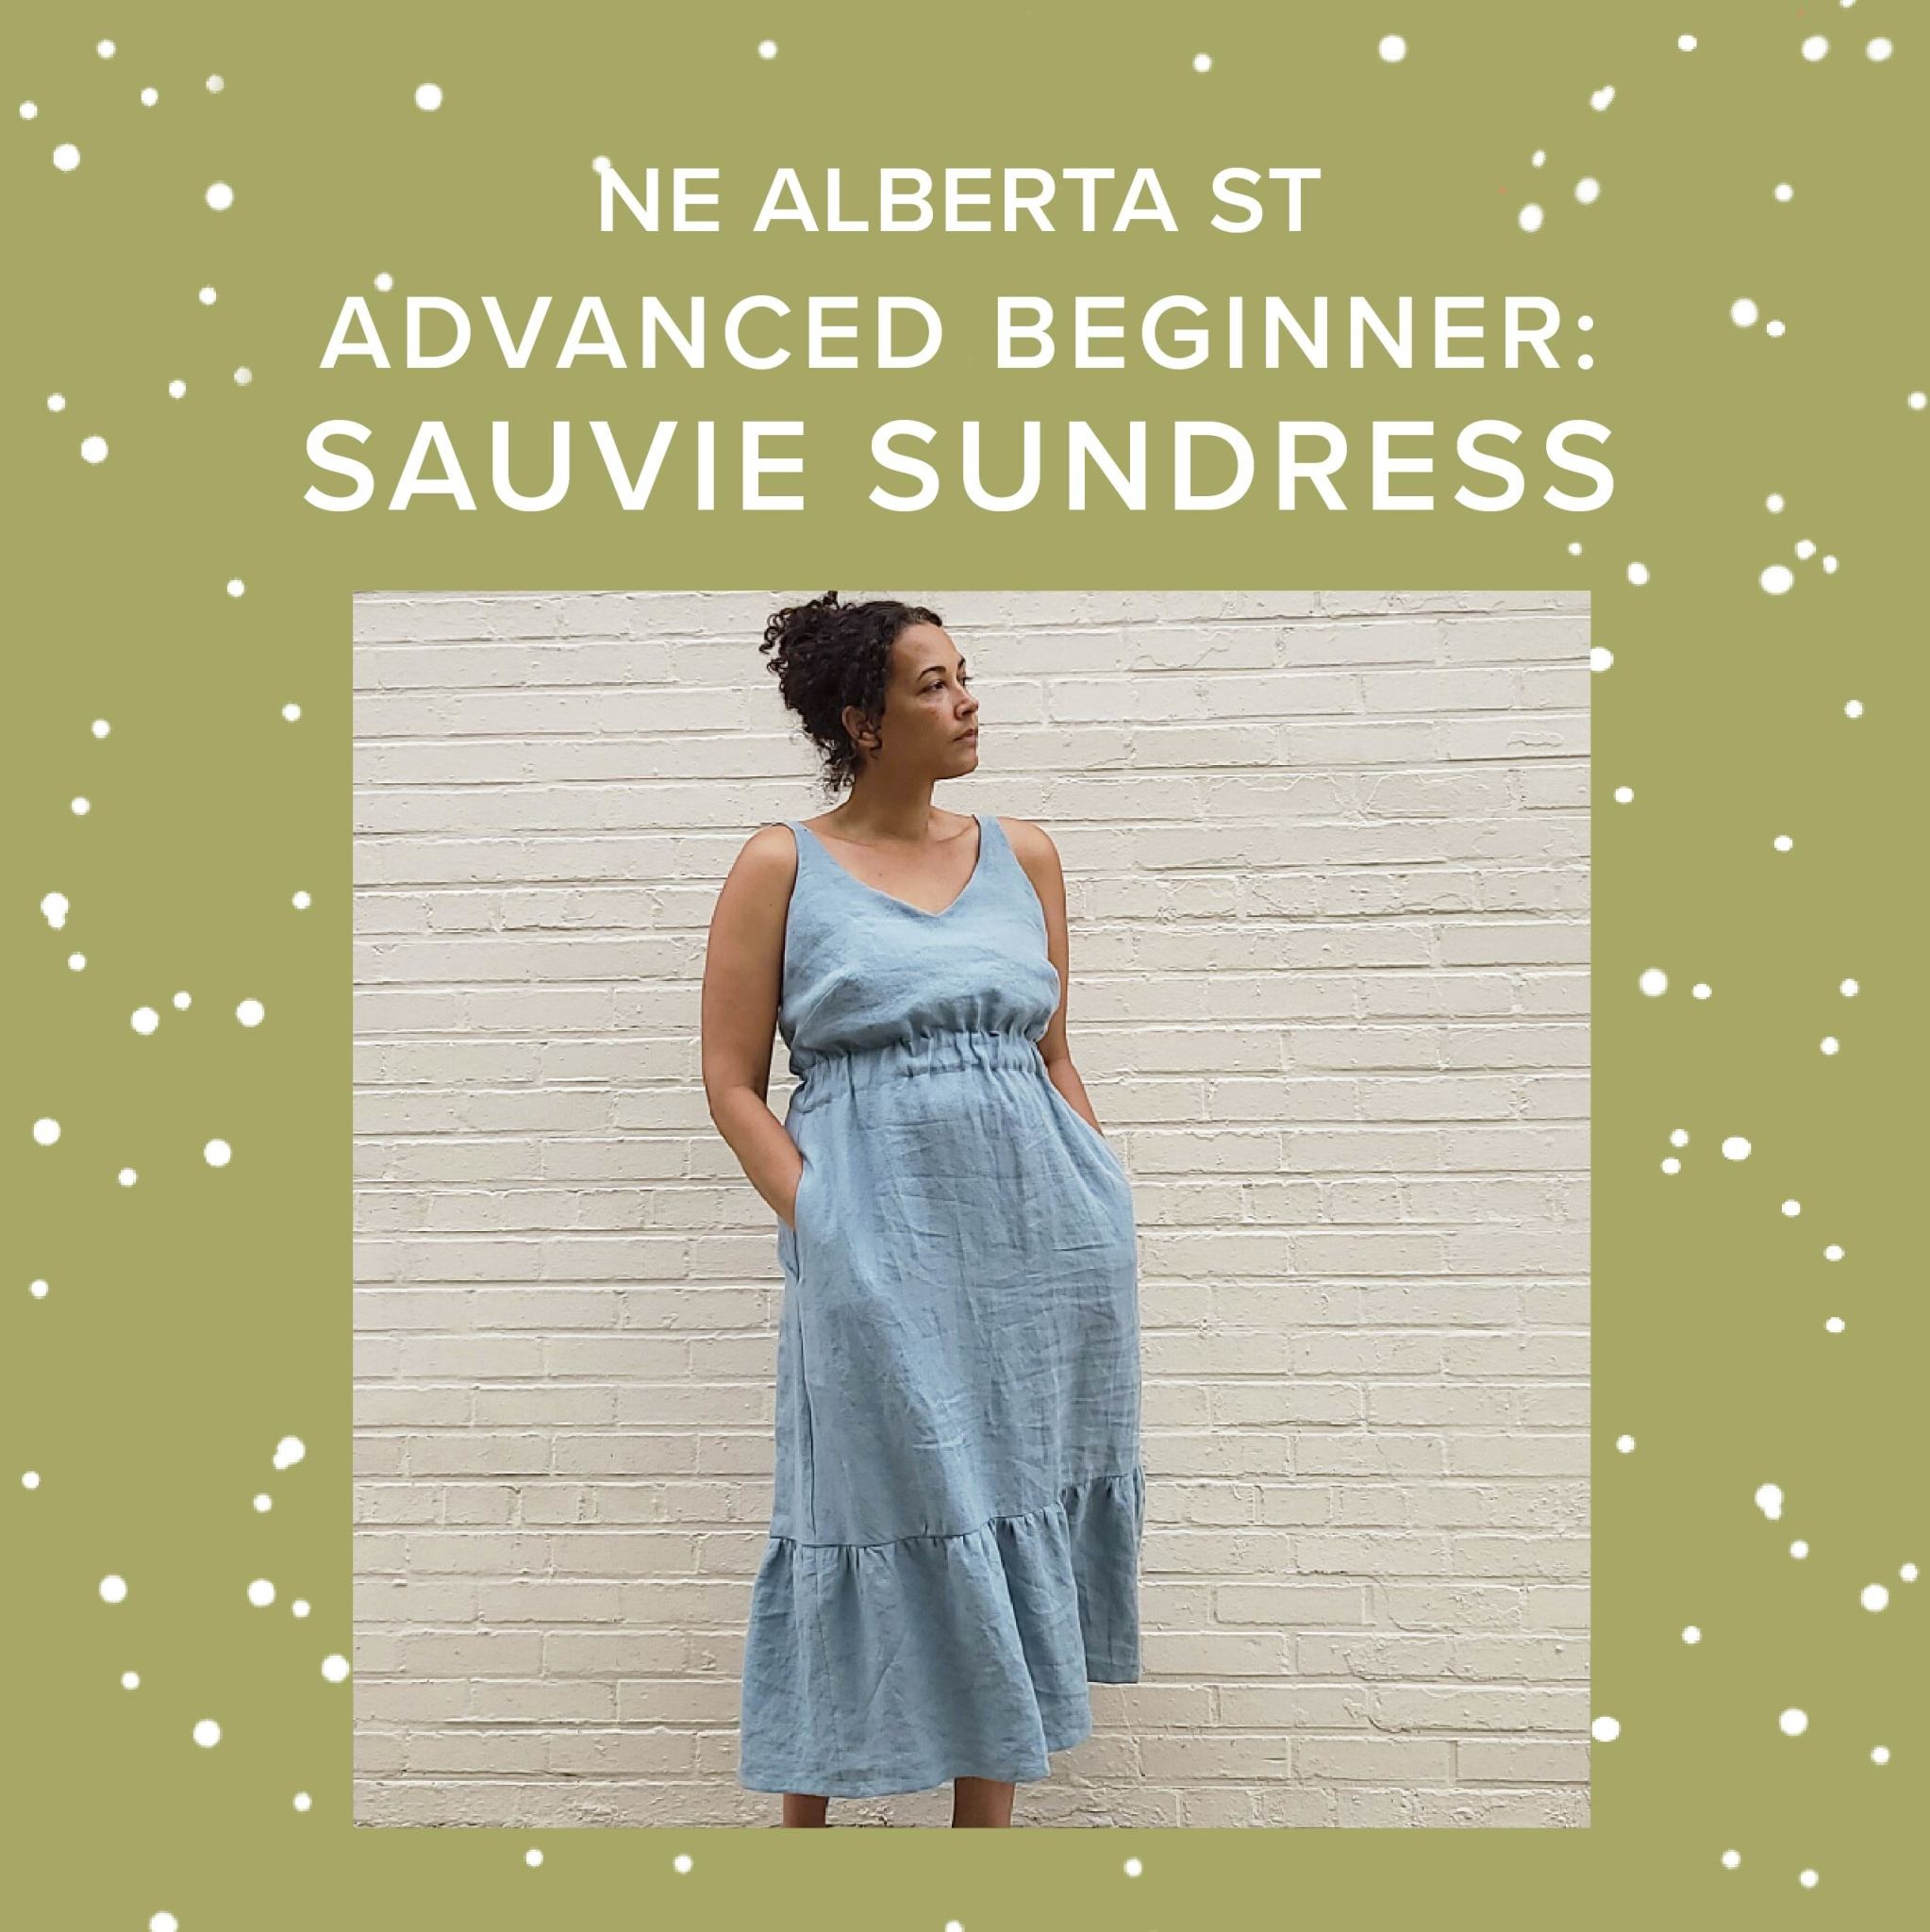 Colleen Connolly CLASS FULL: Advanced Beginner: Sauvie Sundress, Tuesdays, August 13th, 20th, & 27th, 5:30pm-8:30pm